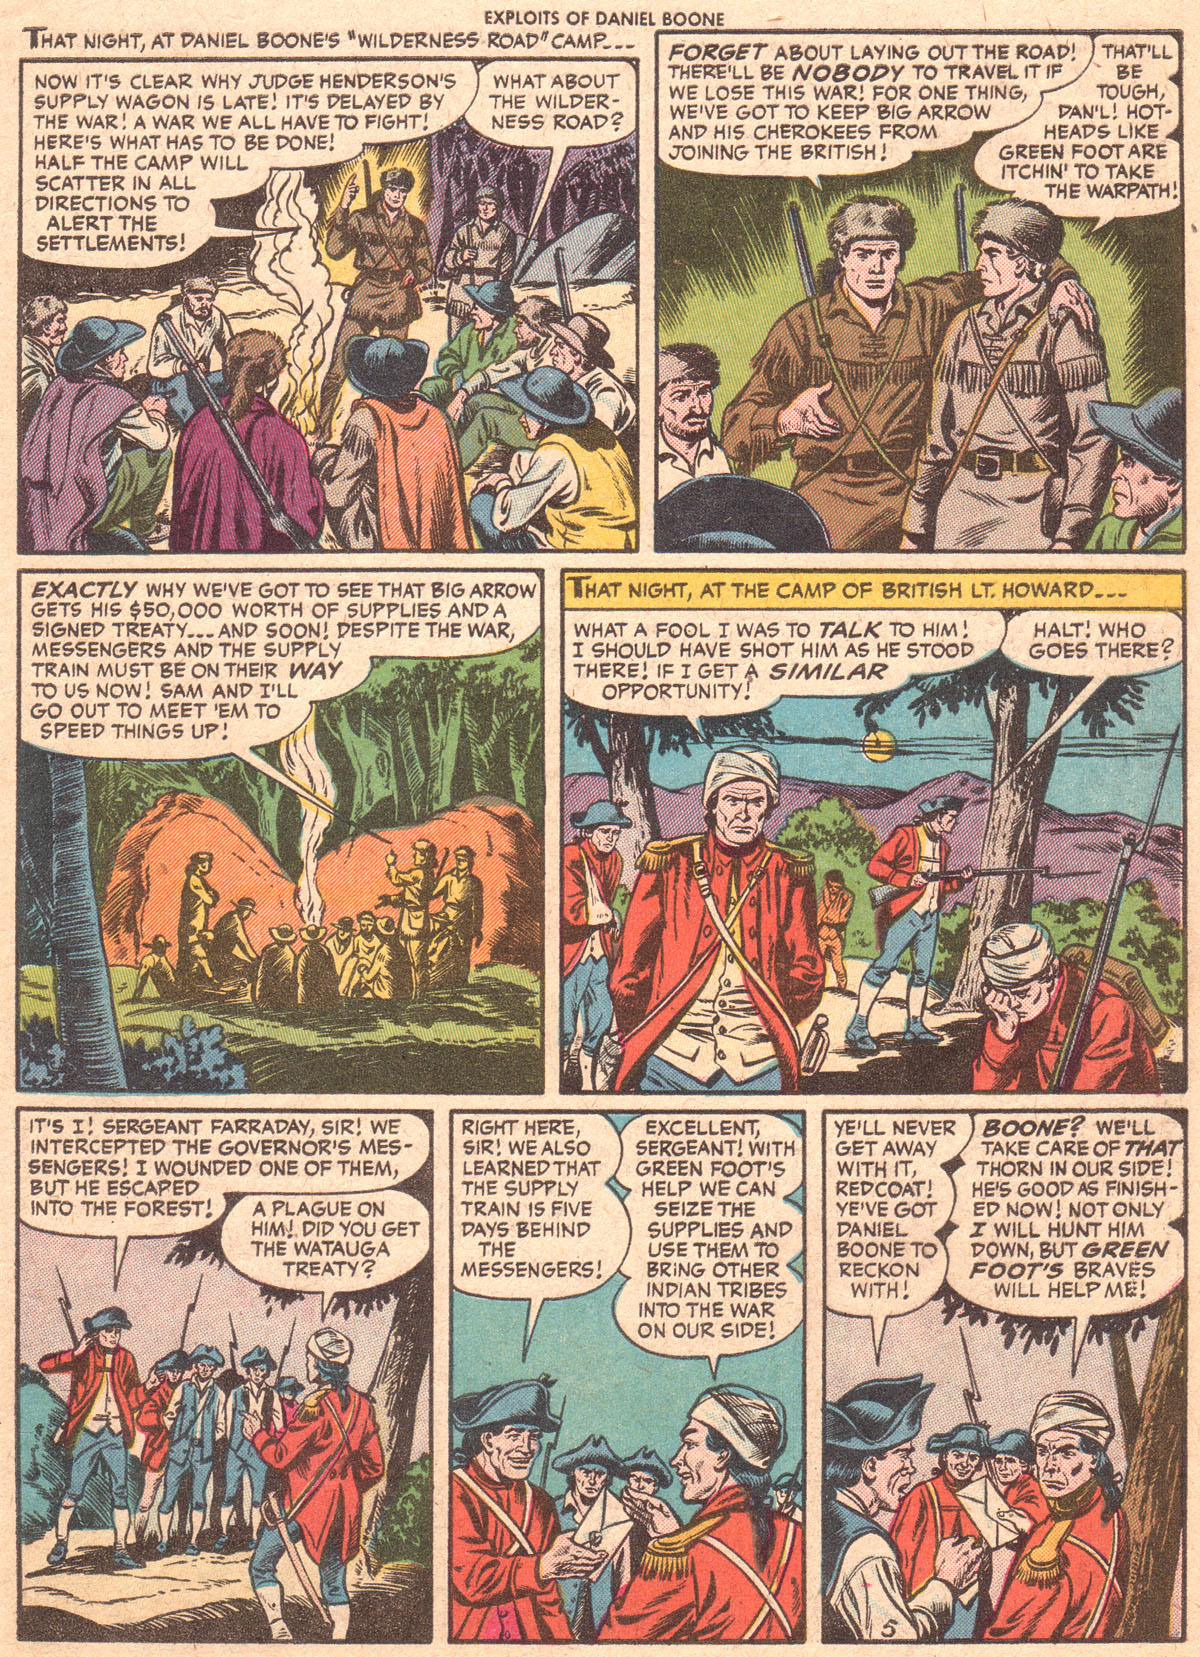 Read online Exploits of Daniel Boone comic -  Issue #5 - 7